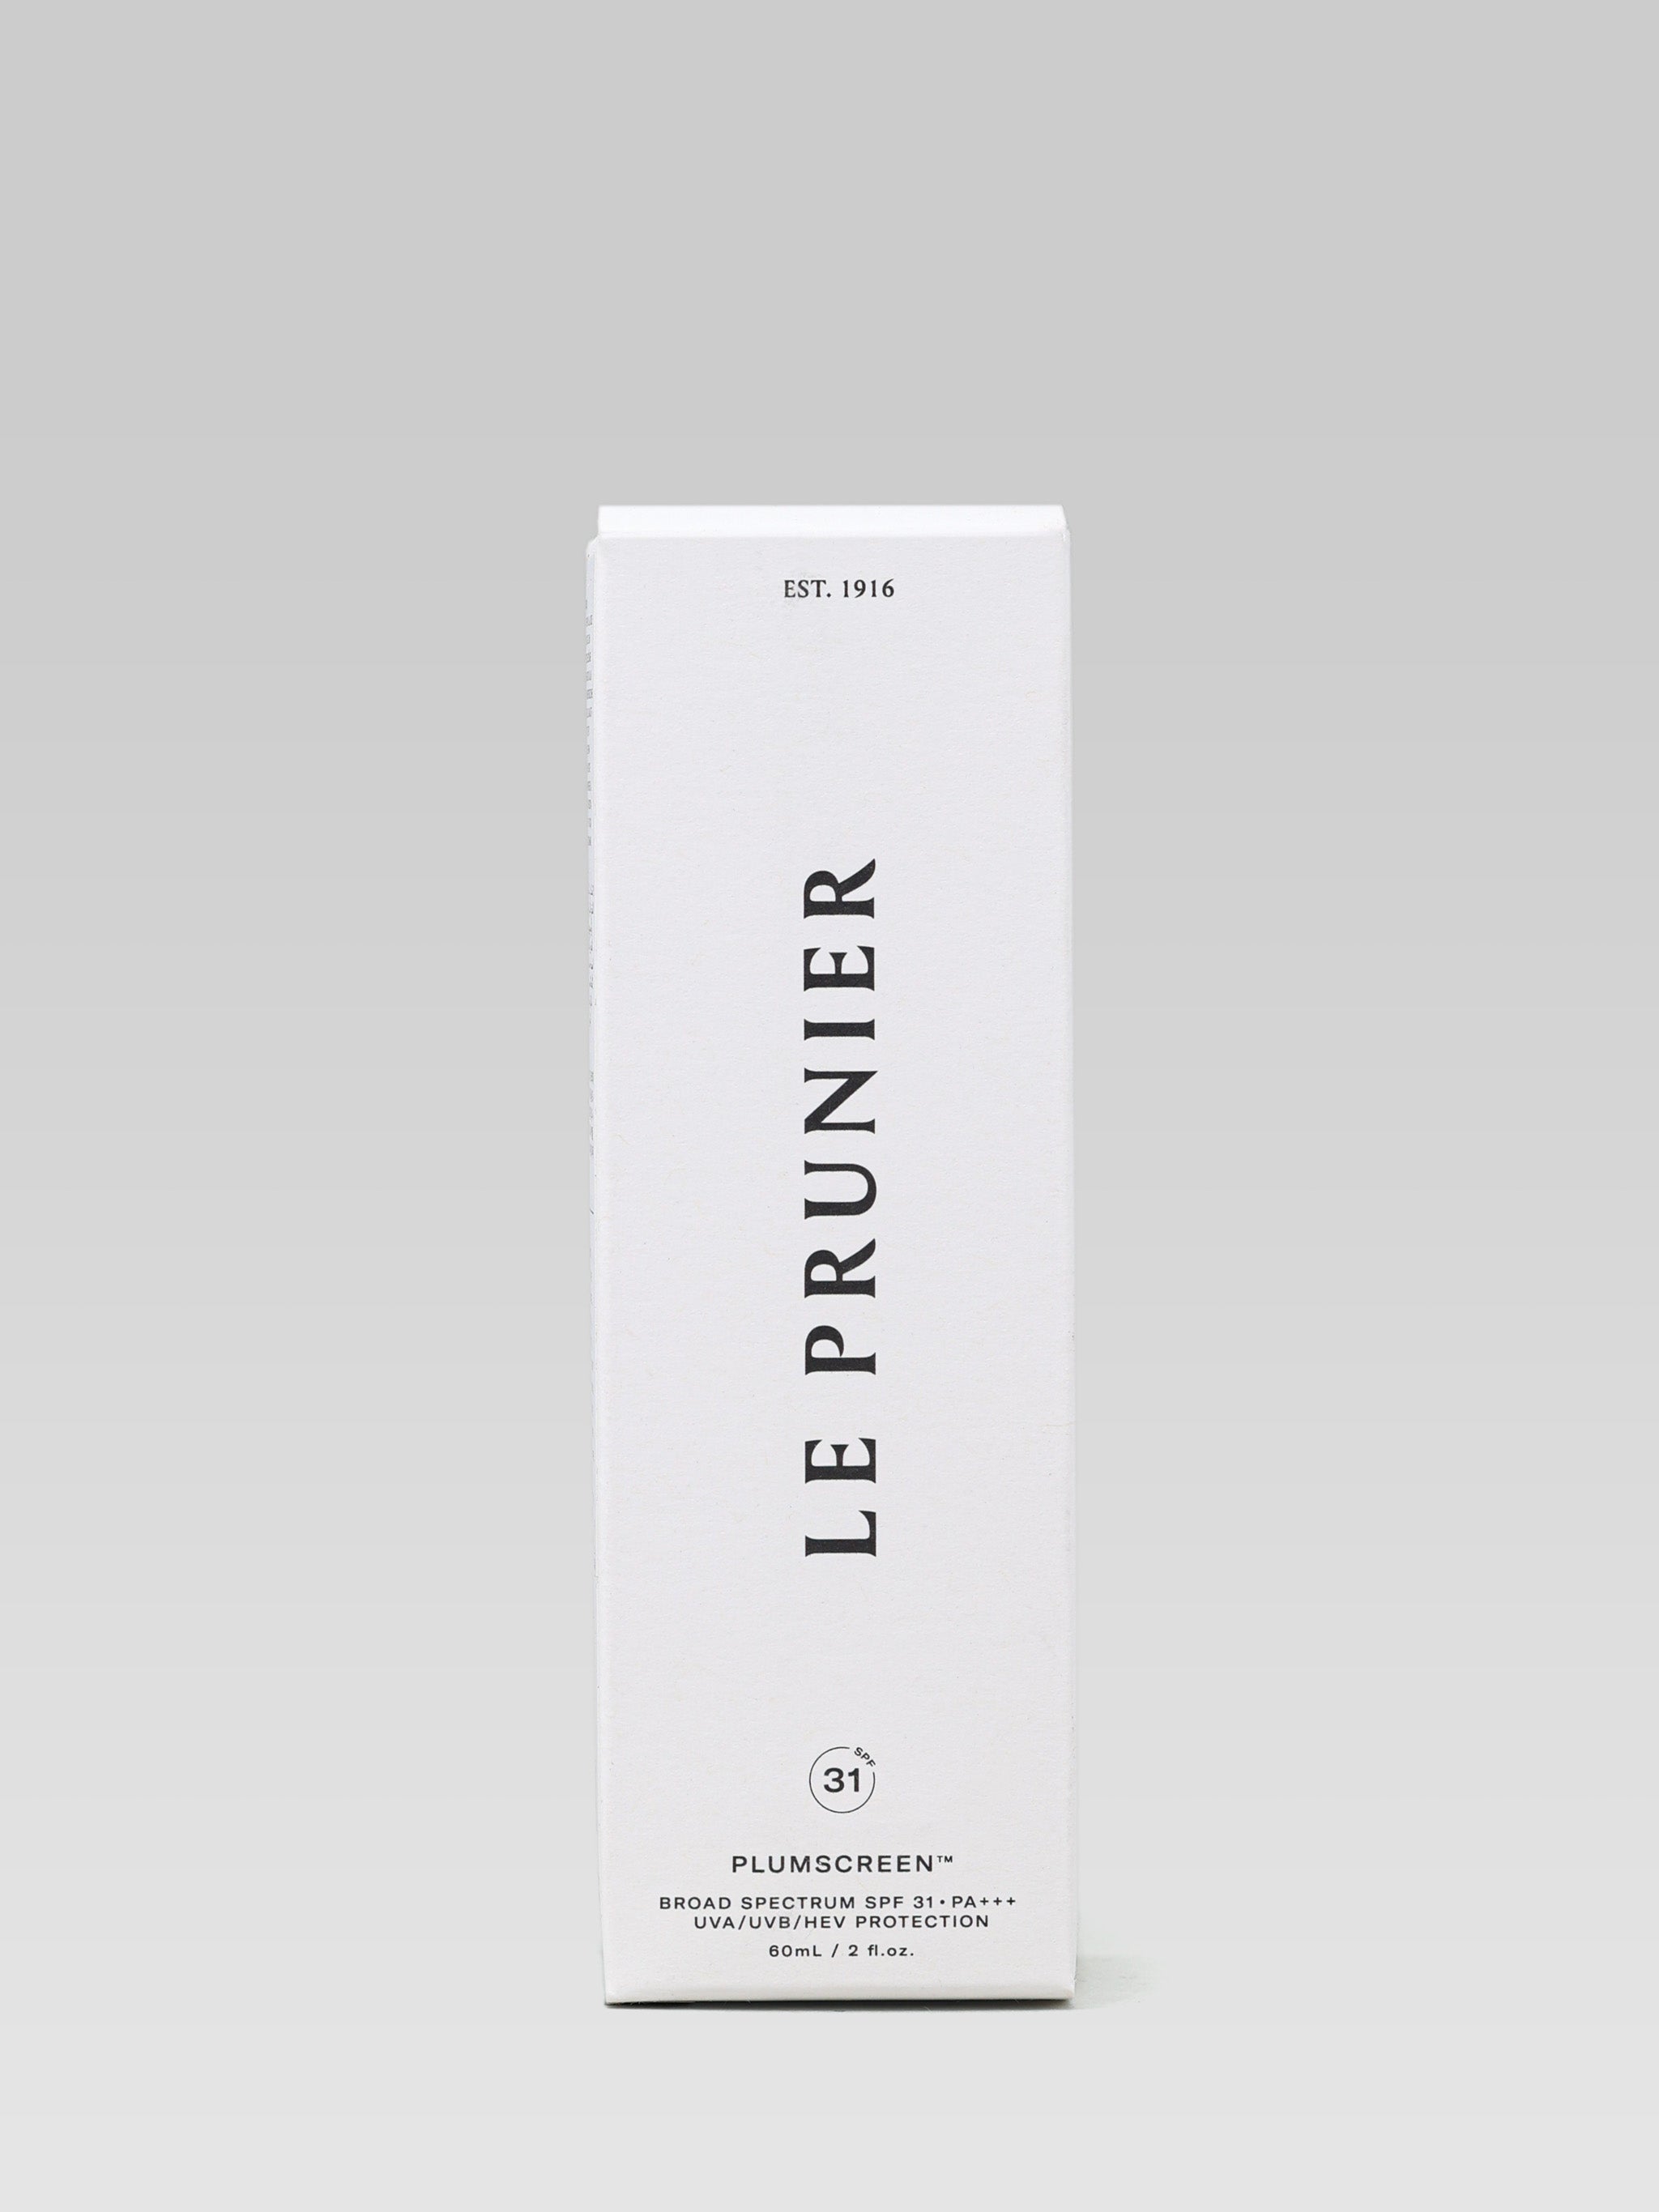 Le Prunier Plum Beauty Oil product packaging SPF31